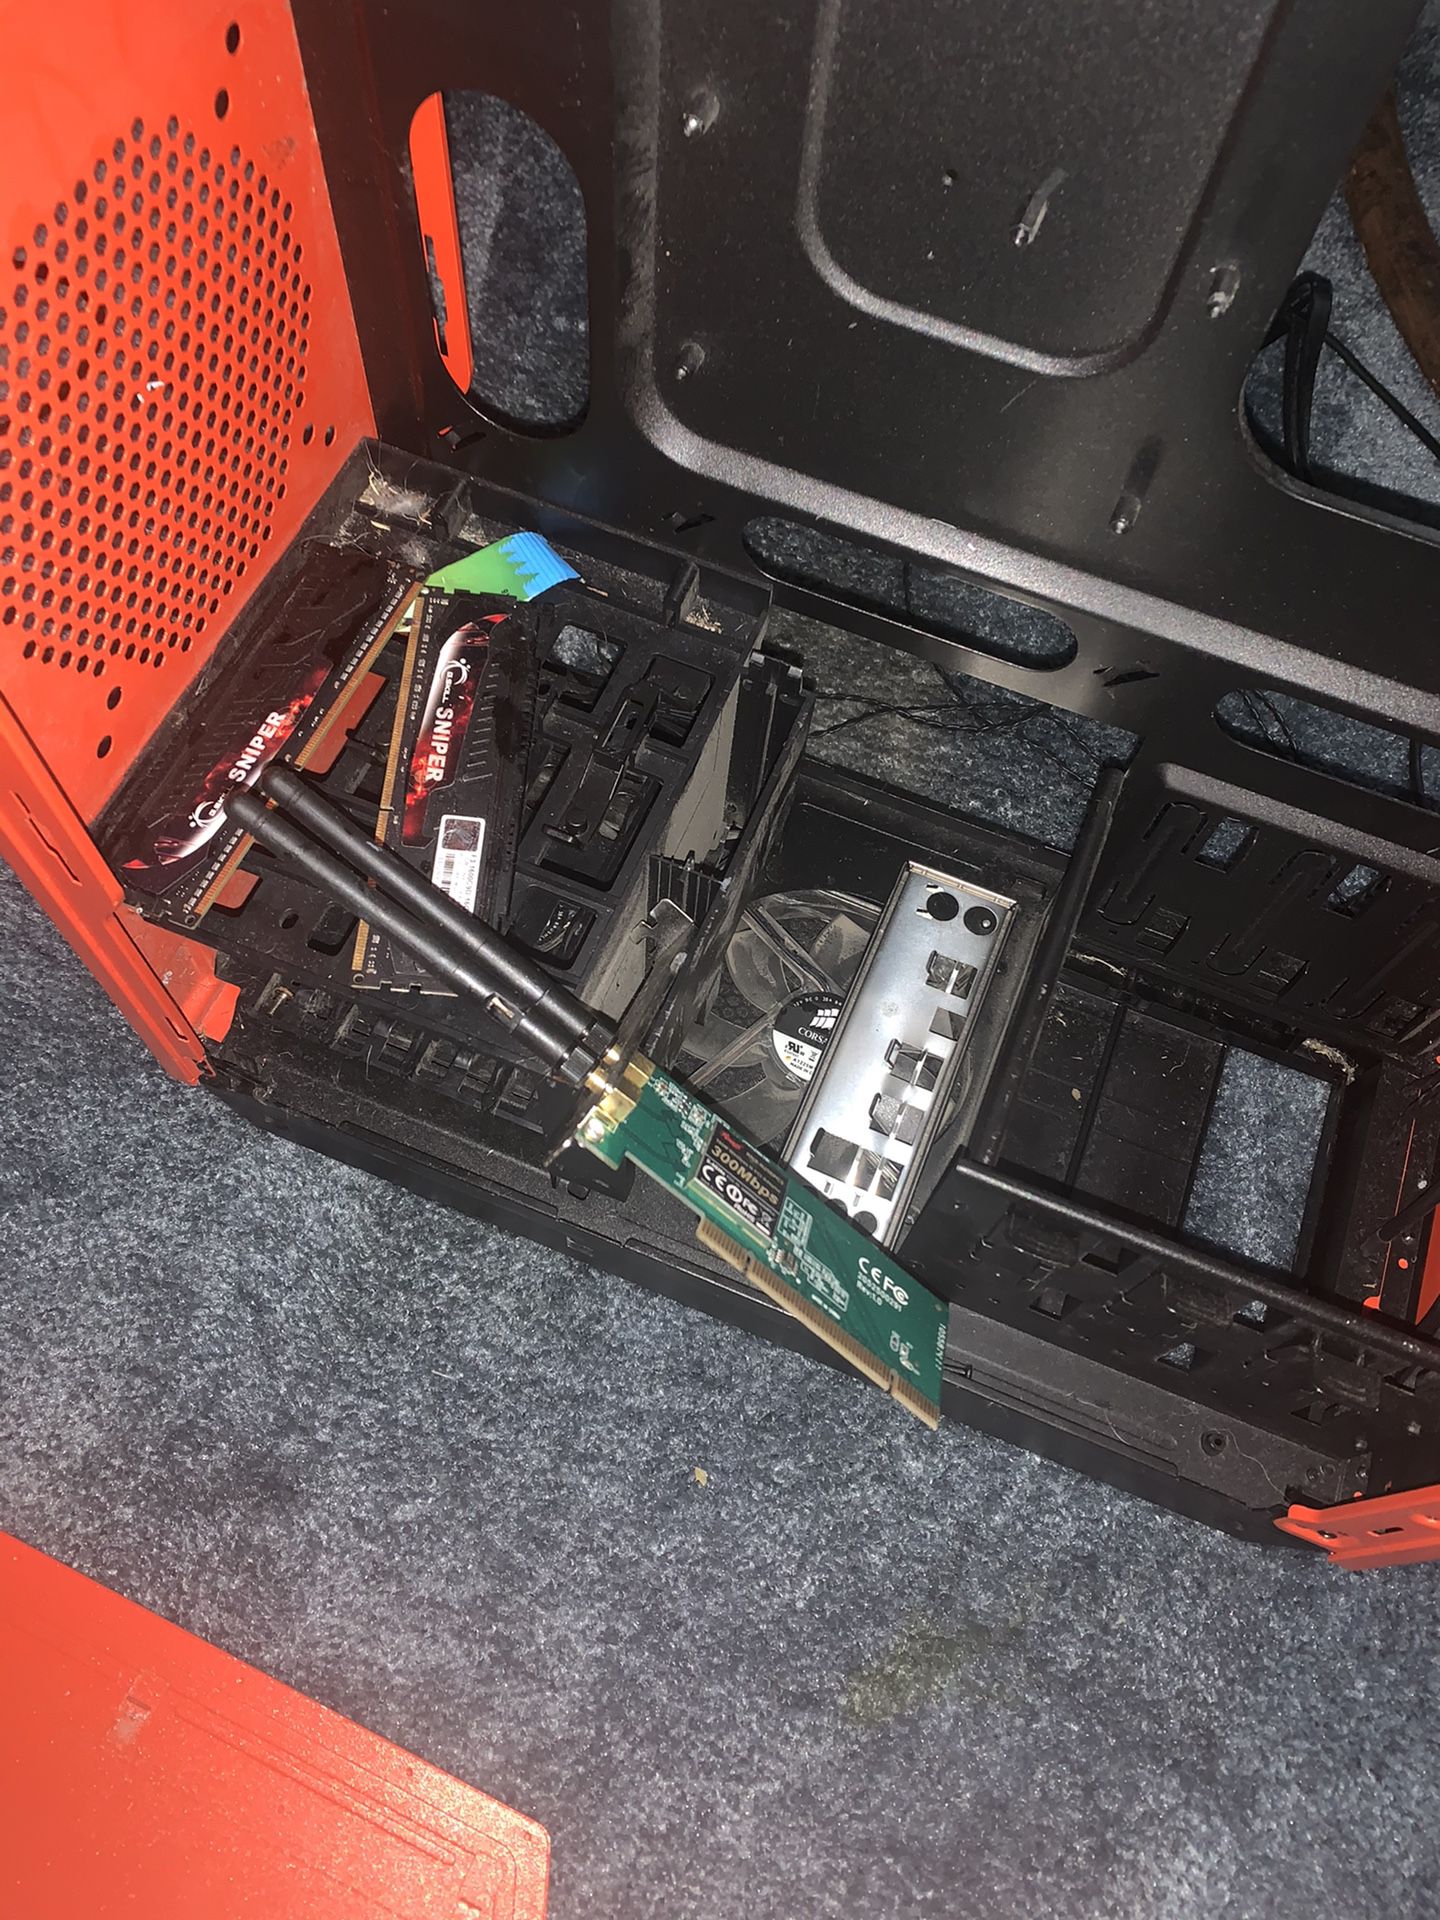 Gaming Pc Case with Morherboard and Ram sticks